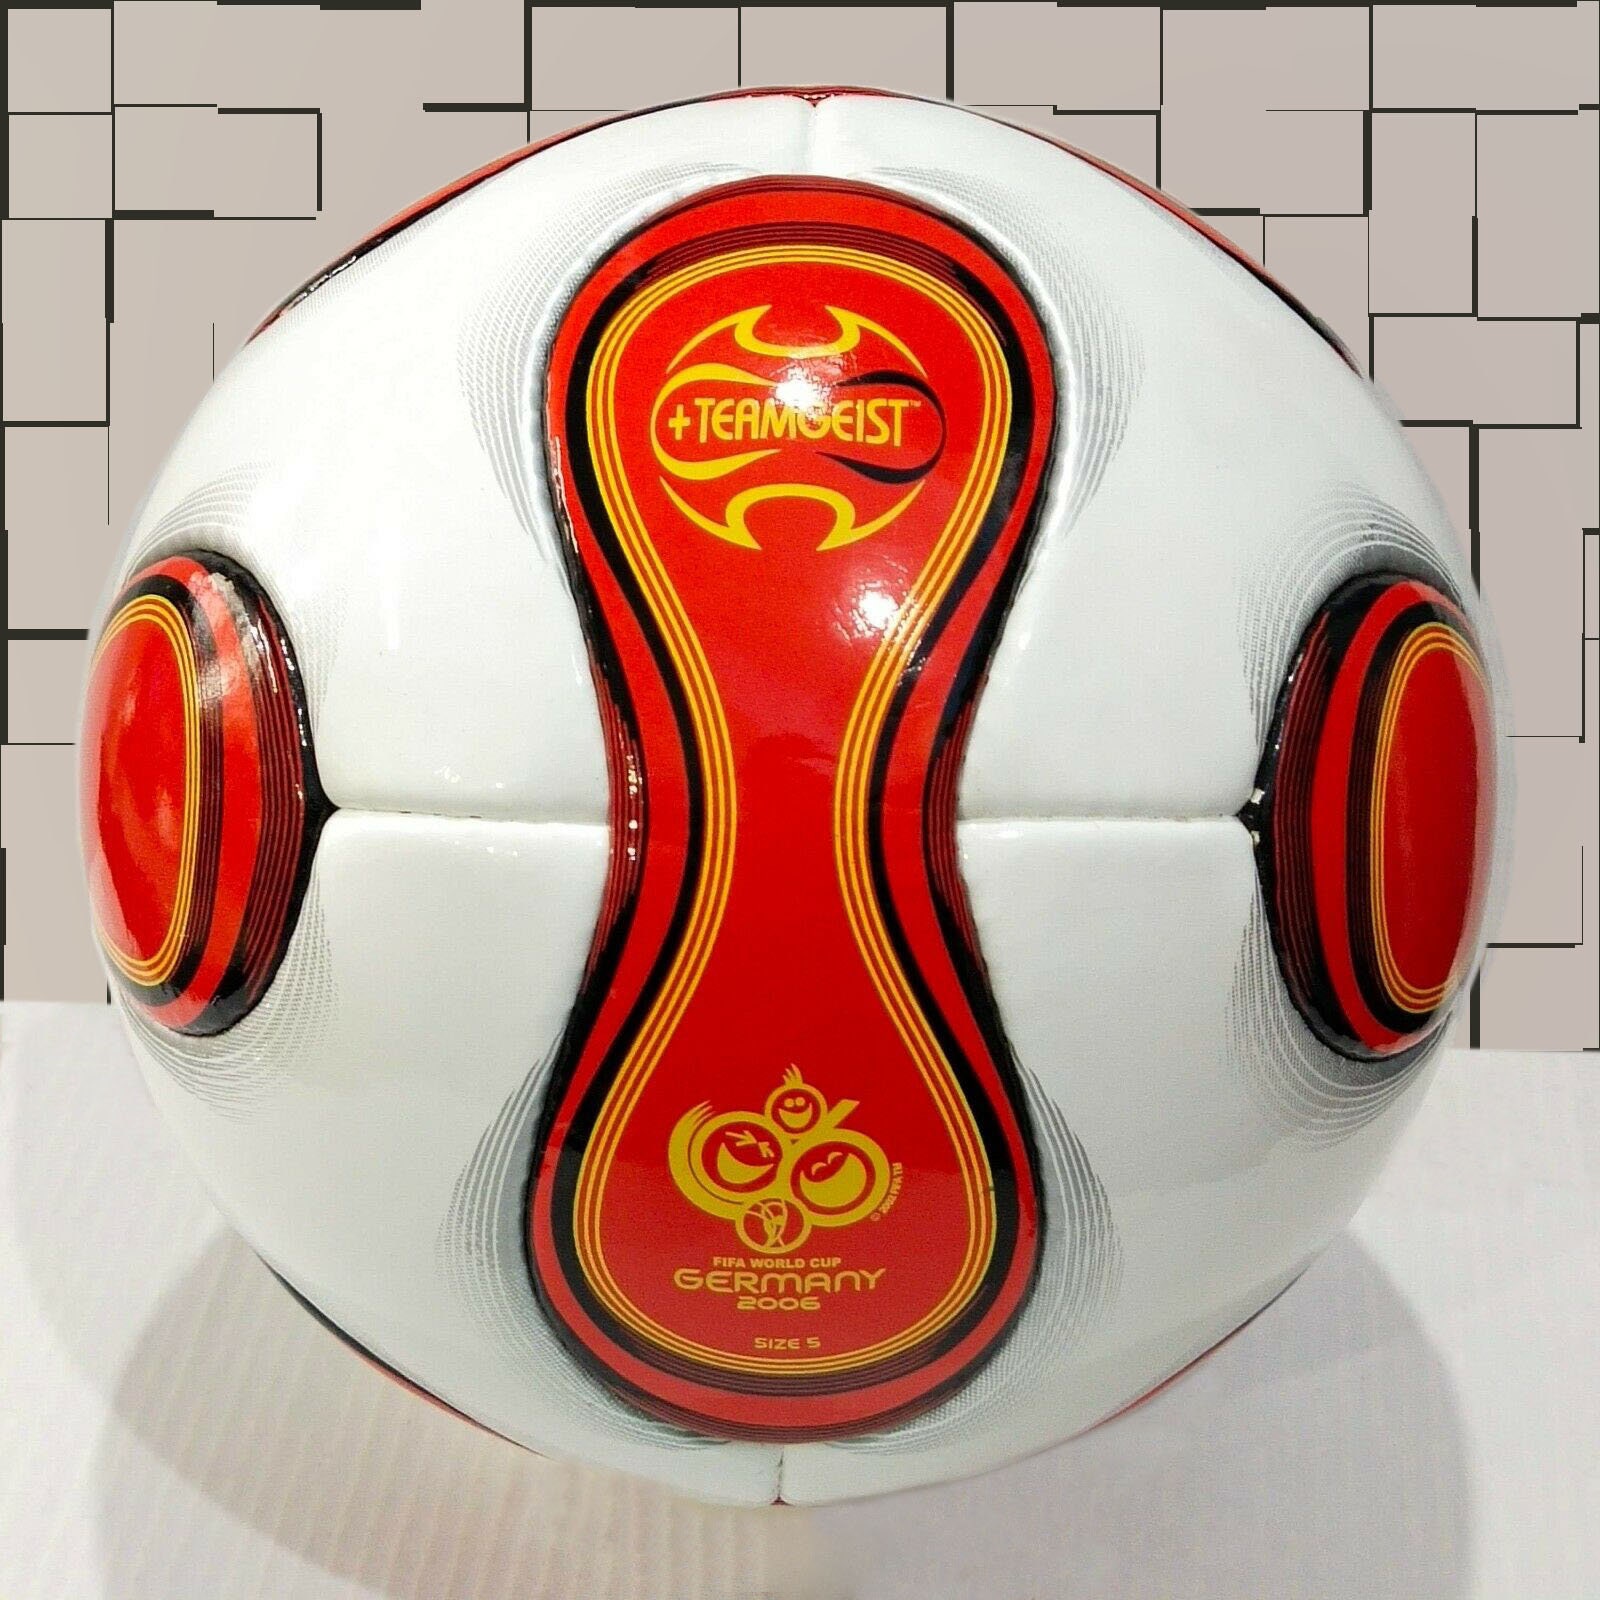 Teamgeist Official Match Ball / Cup Soccer Ball 2006 - Etsy